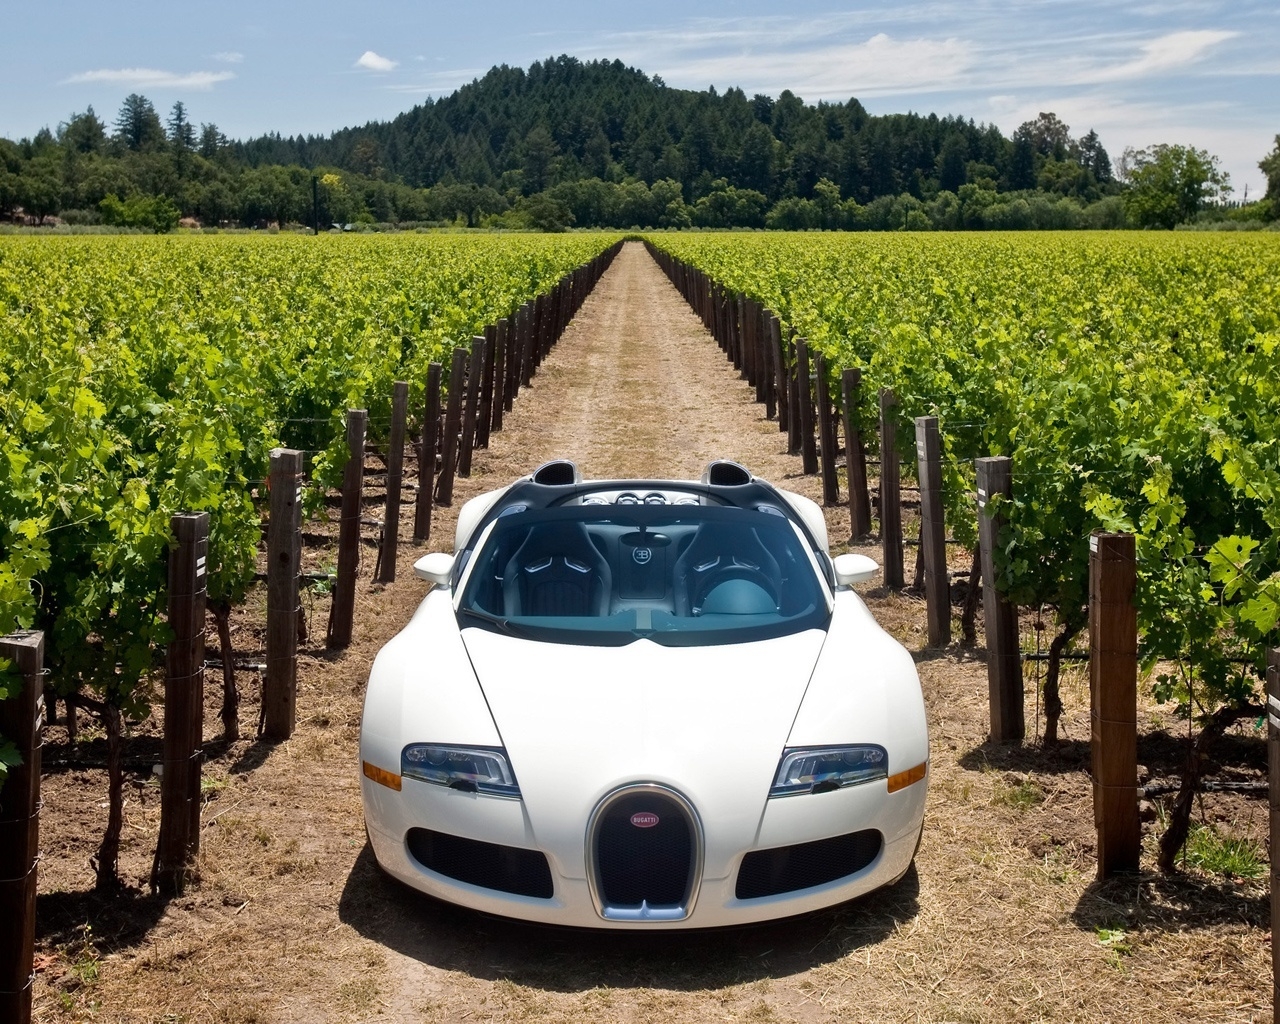 Bugatti Veyron 16.4 Grand Sport 2010 in Napa Valley - Front 2 for 1280 x 1024 resolution